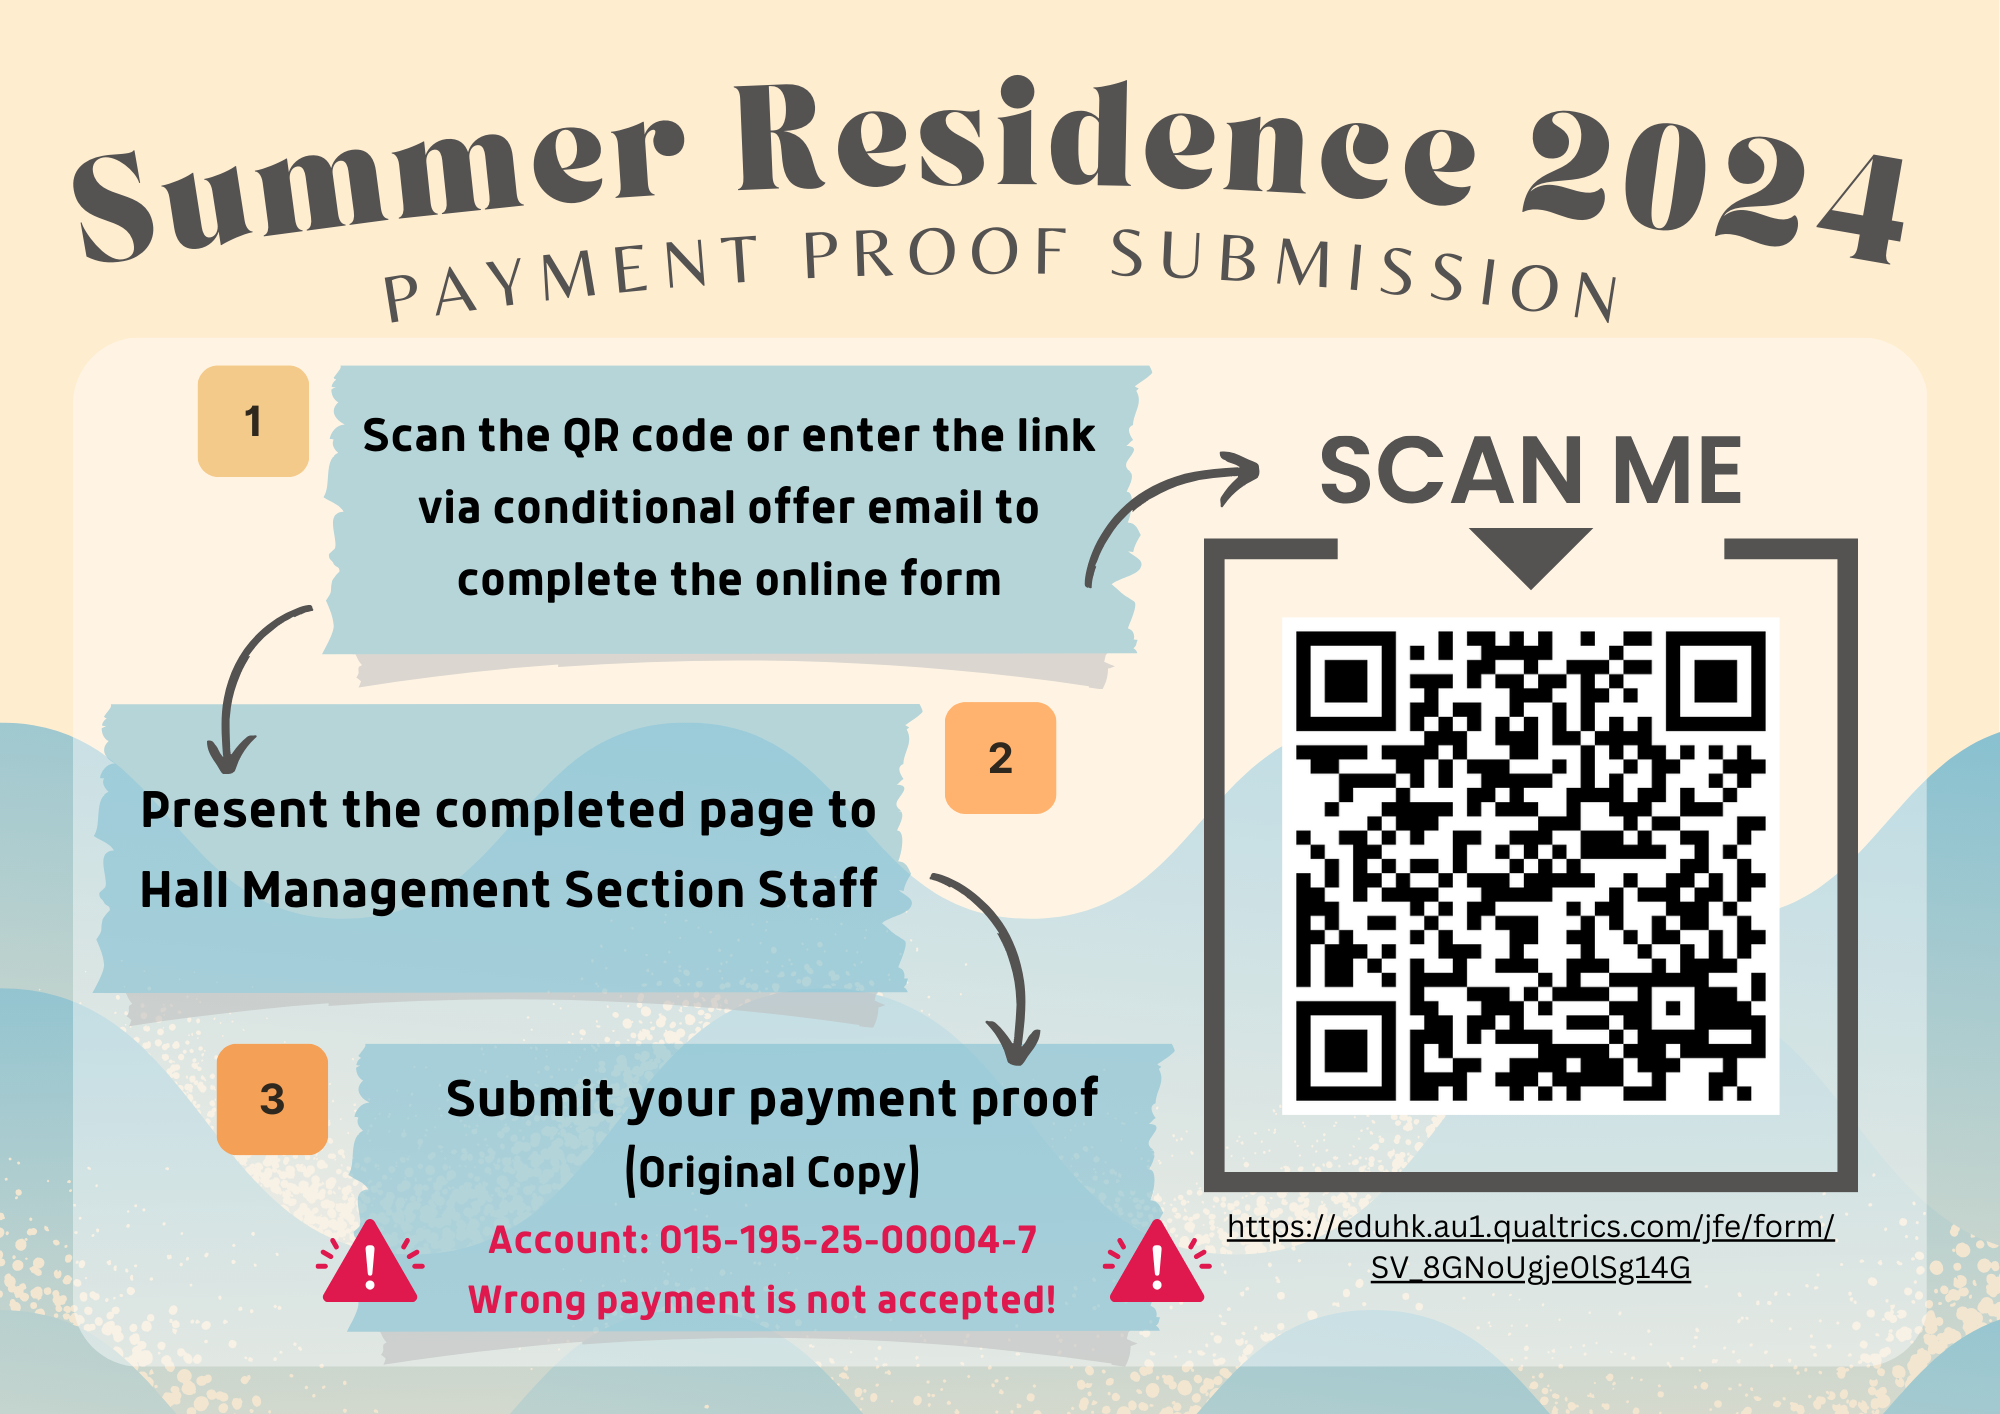 Self Photos / Files - Summer Residence 2024 (Payment Proof Submission)